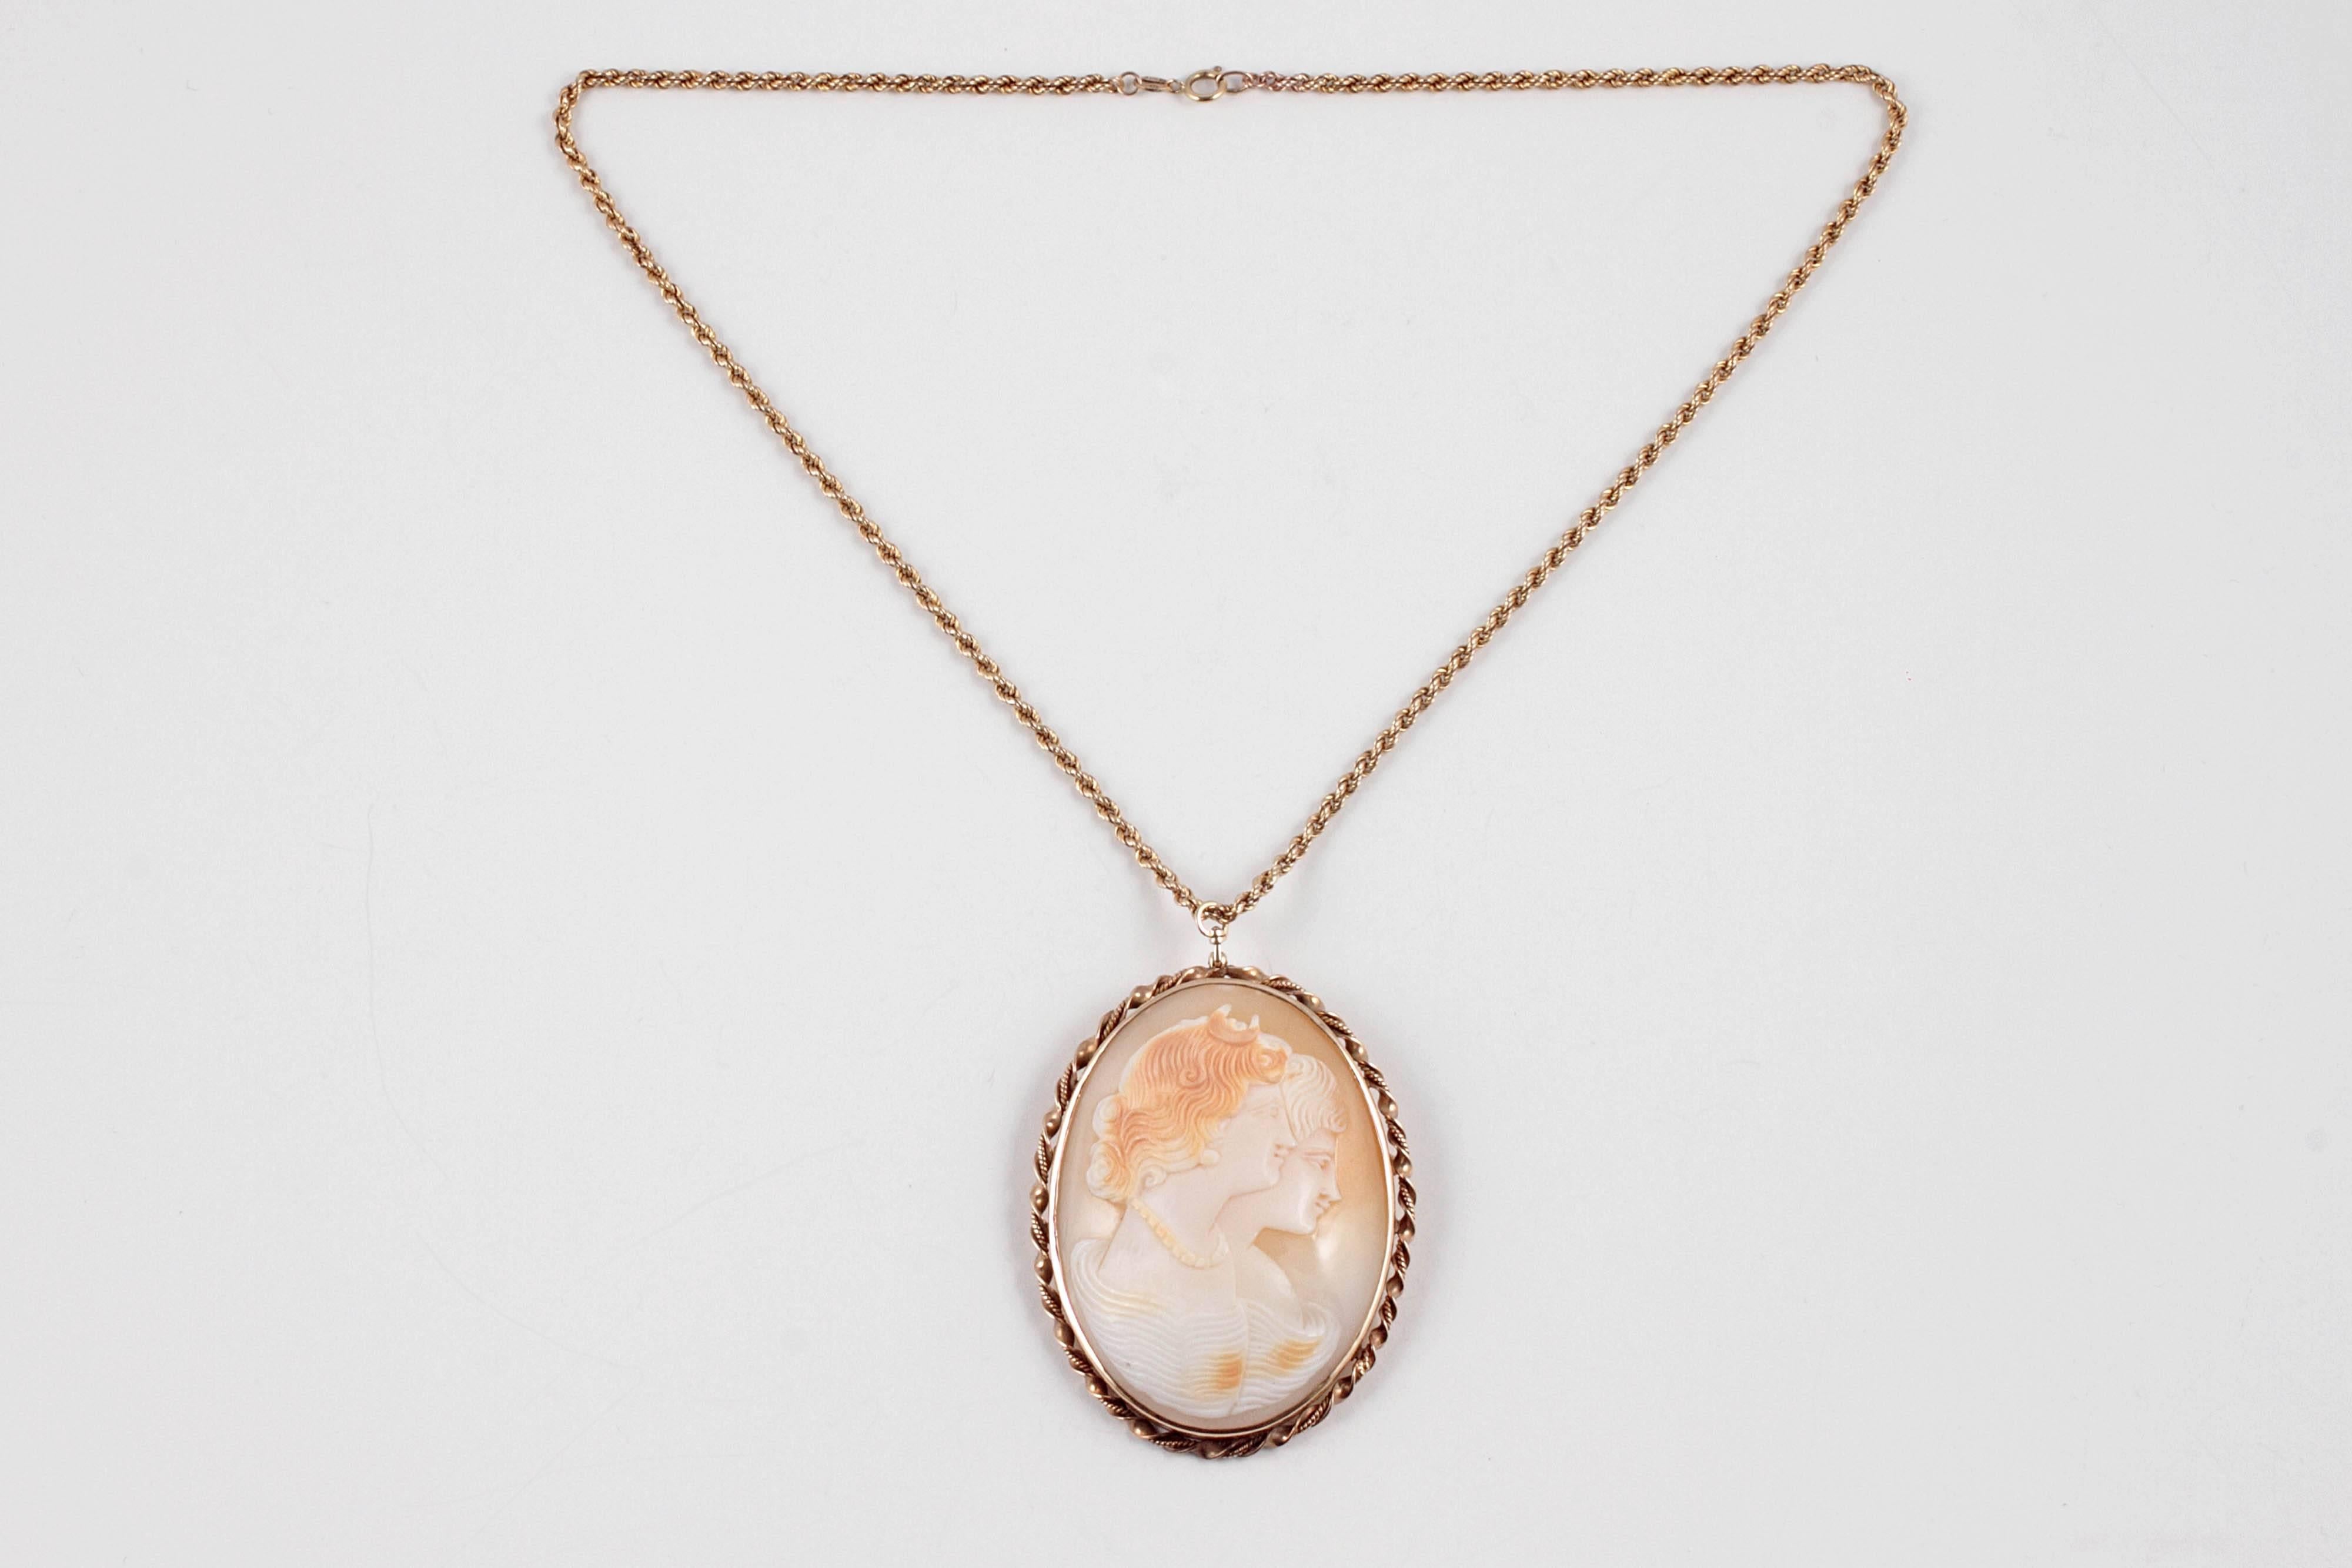 Lovely and unusual -  14 karat yellow gold cameo depicting two female forms, one with a lovely strand of pearls encircling her neck!  The cameo measures 2 3/4 inches length x 2 inches in width and is suspended from an 18 inch 9 karat yellow gold